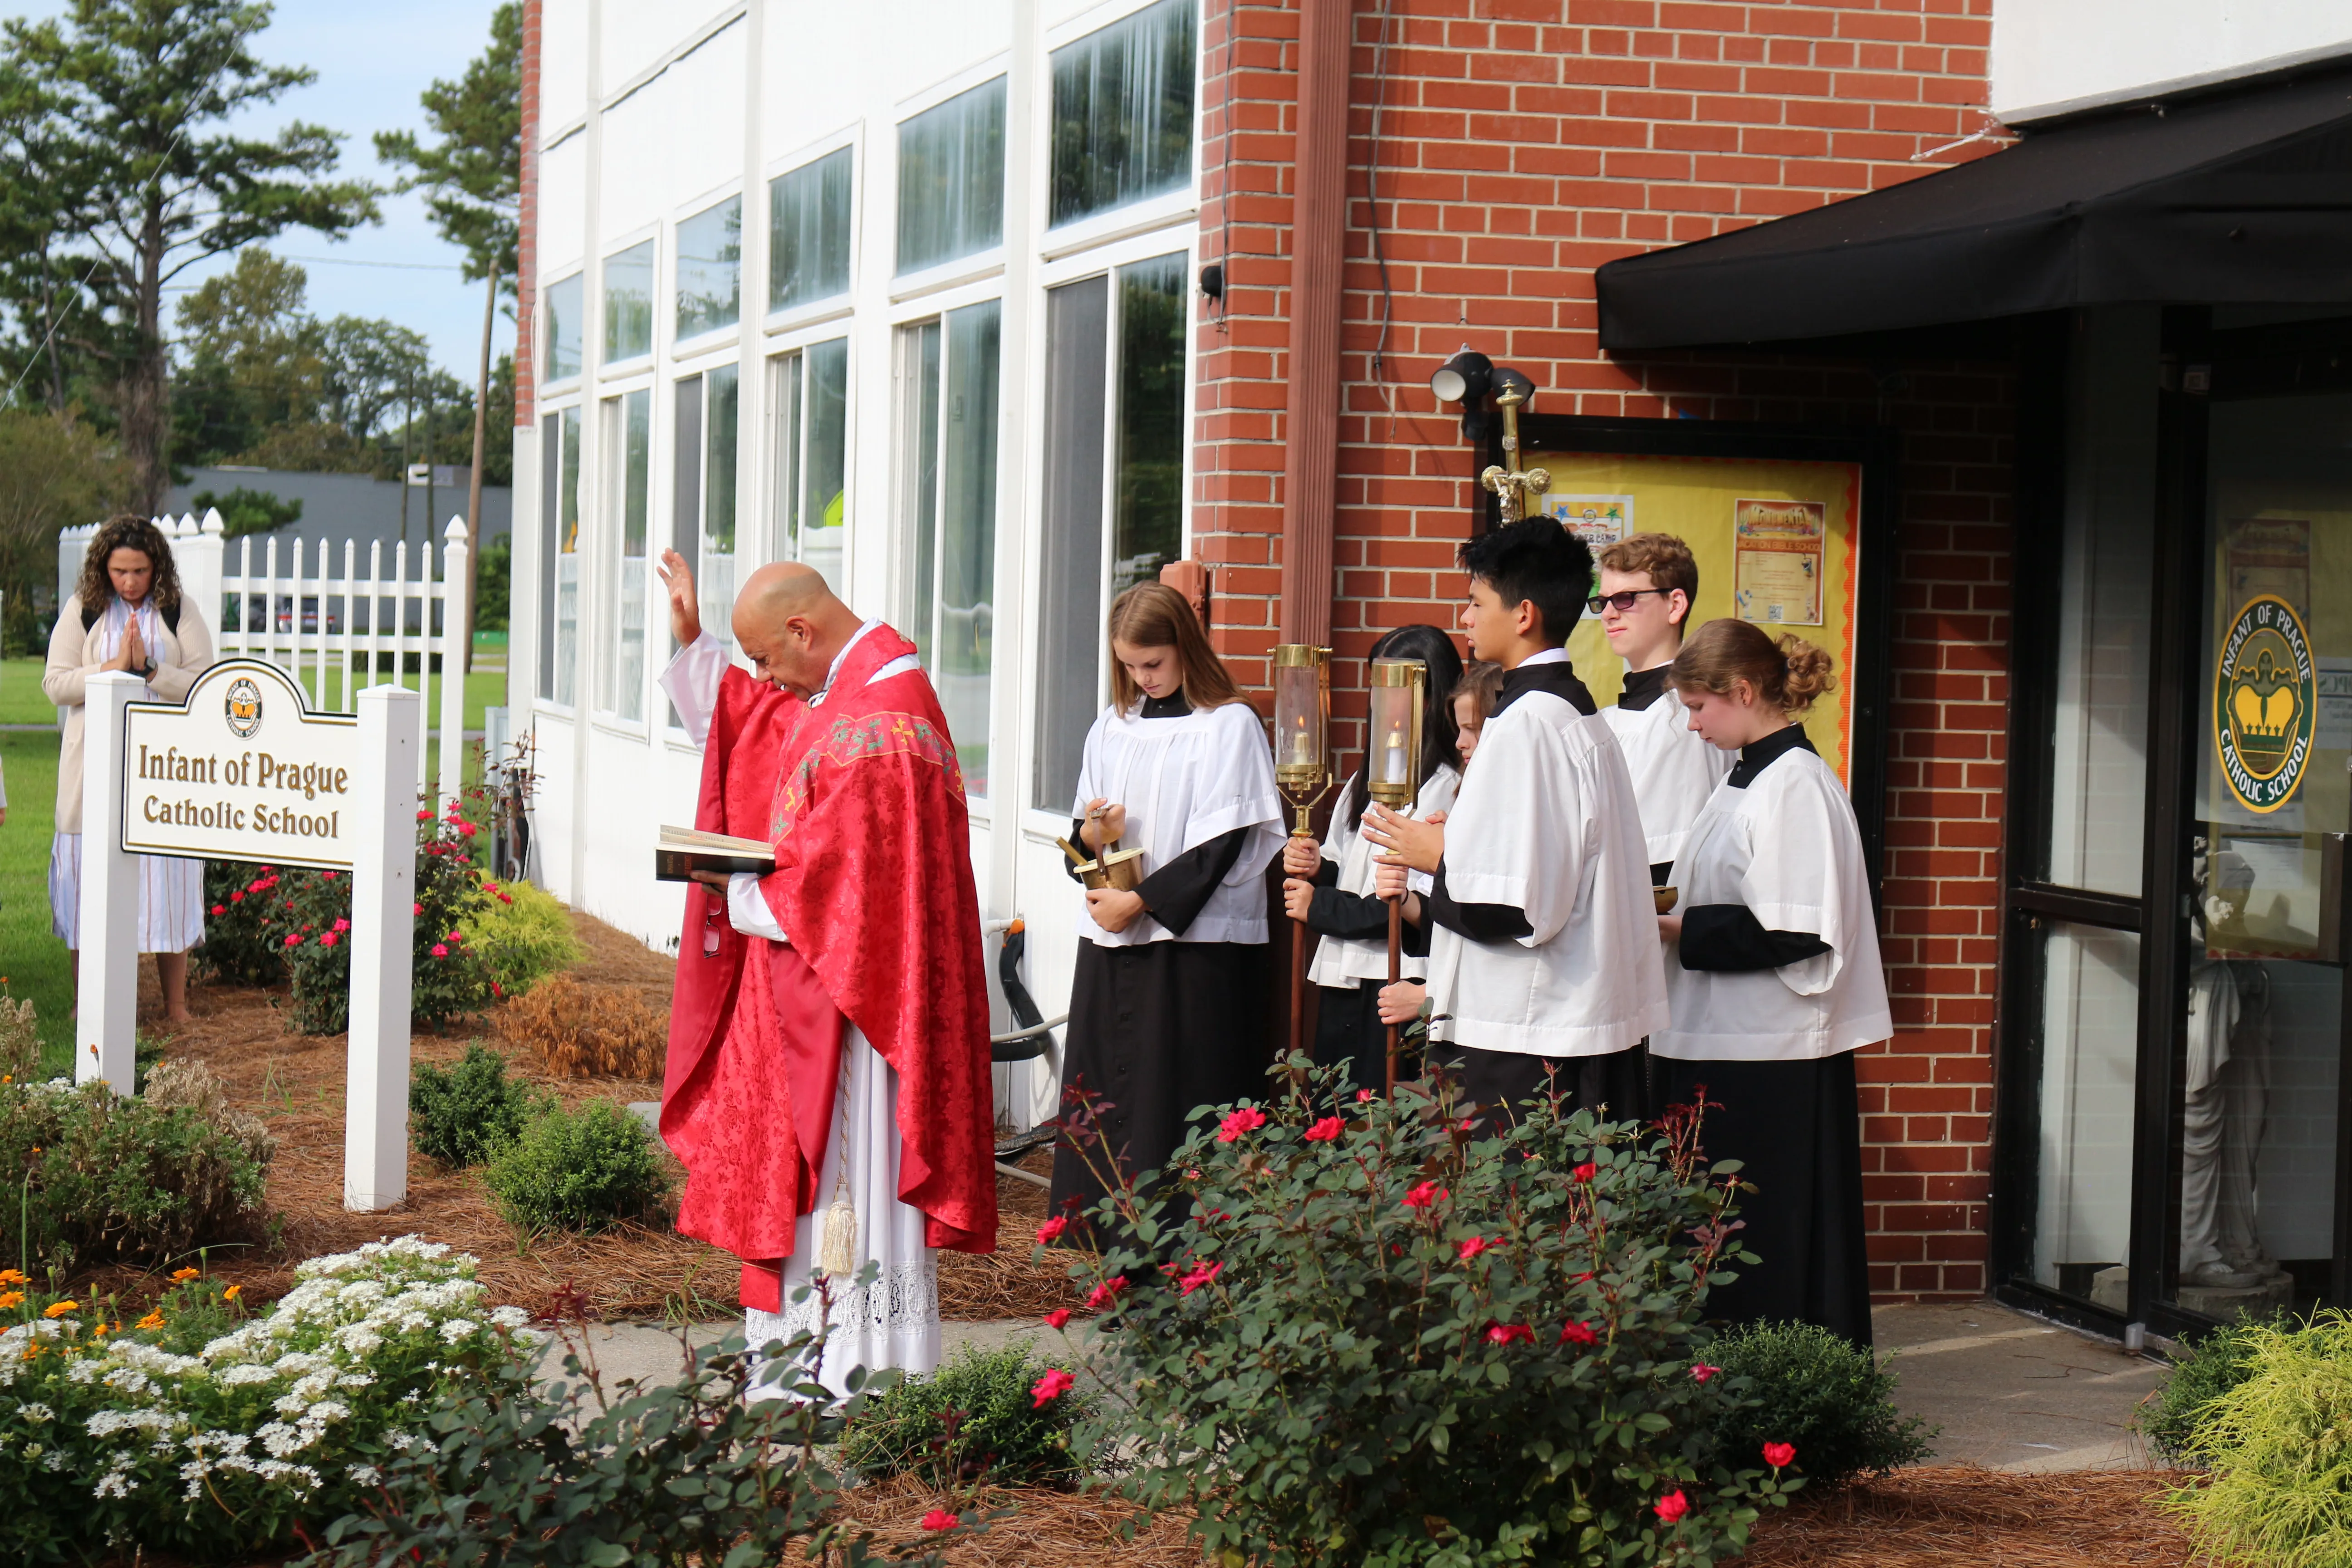 Father J. Victor Gournas offers a blessing outside Infant of Prague Catholic School in Jacksonville, North Carolina. Infant of Prague Catholic School